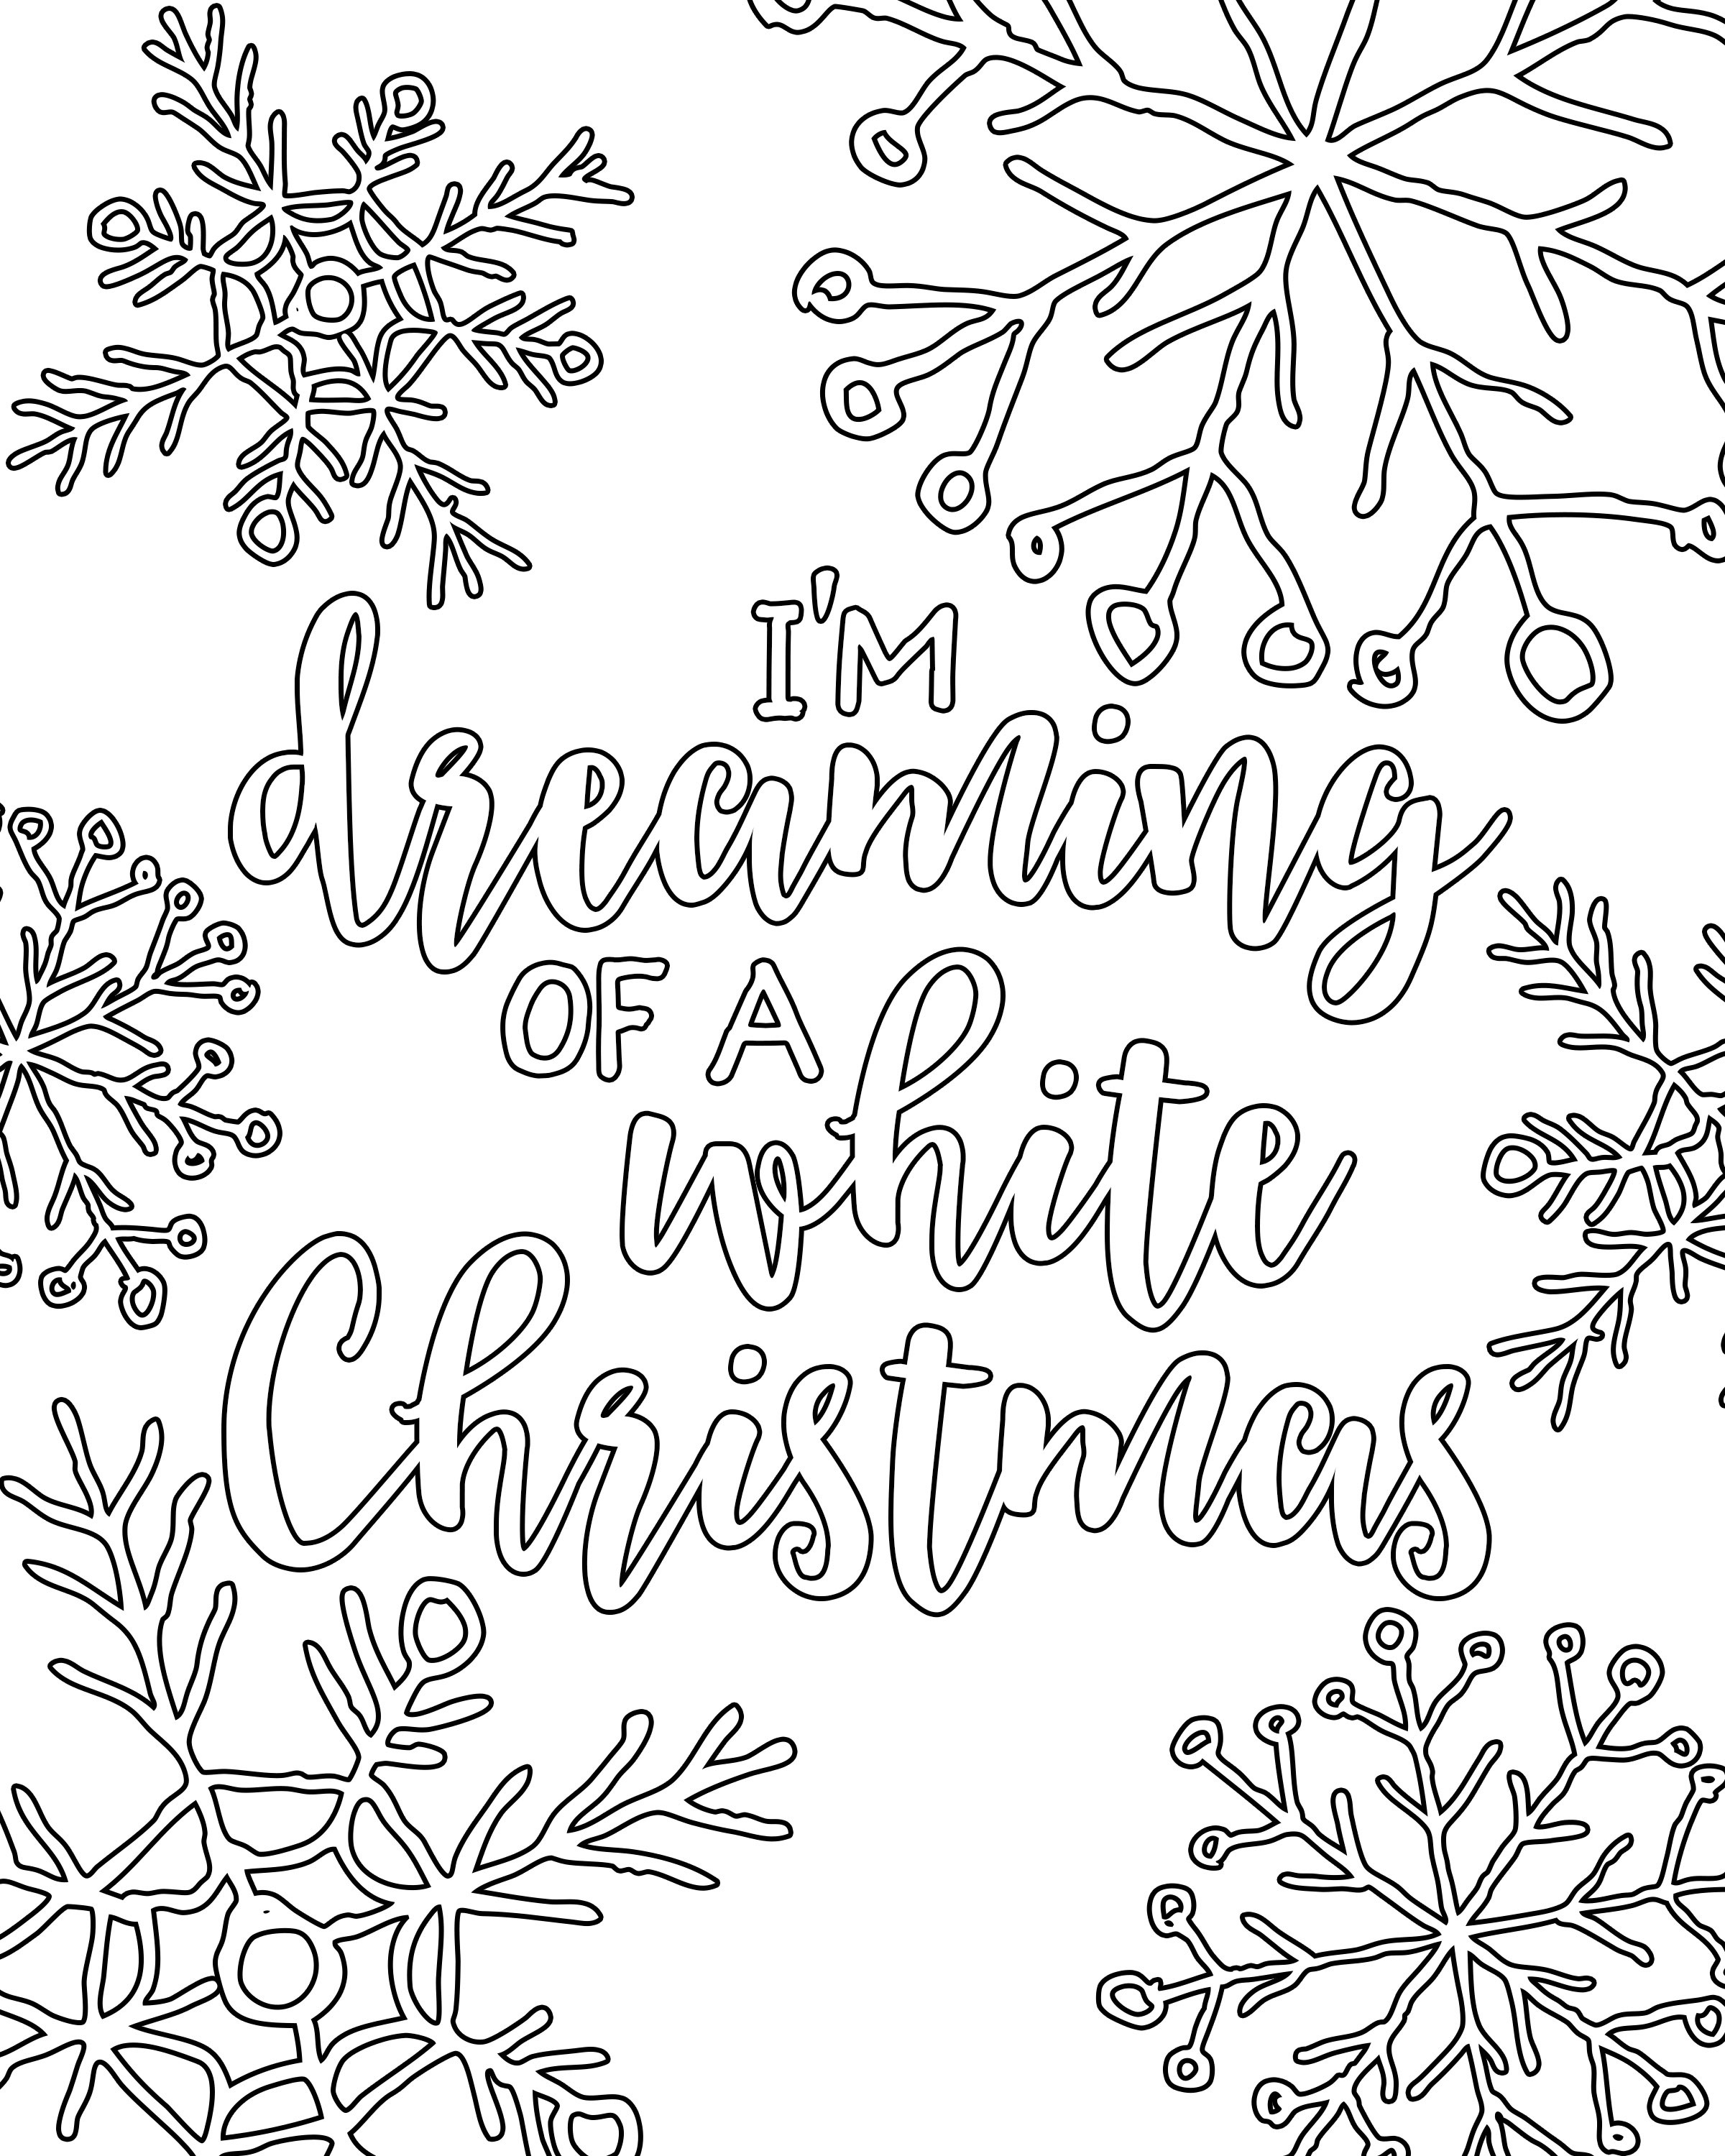 Printable Coloring Pages Christmas
 Free Printable White Christmas Adult Coloring Pages Our